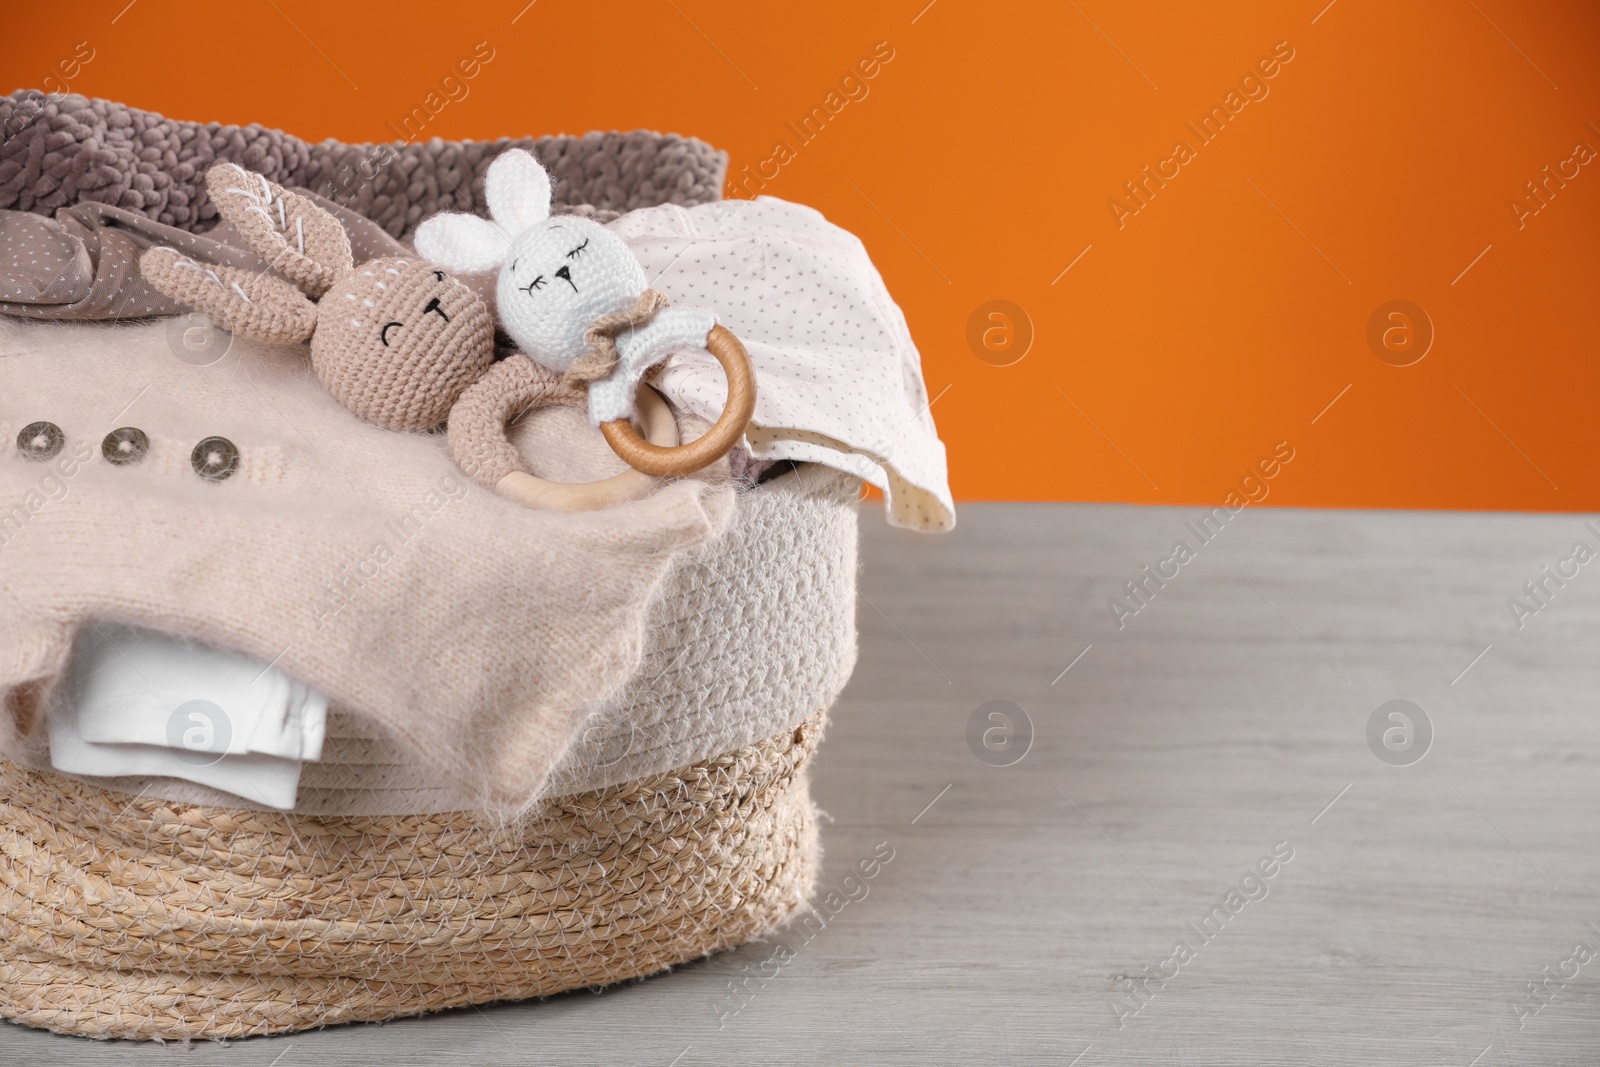 Photo of Laundry basket with baby clothes and crochet toys on wooden table against orange background, space for text